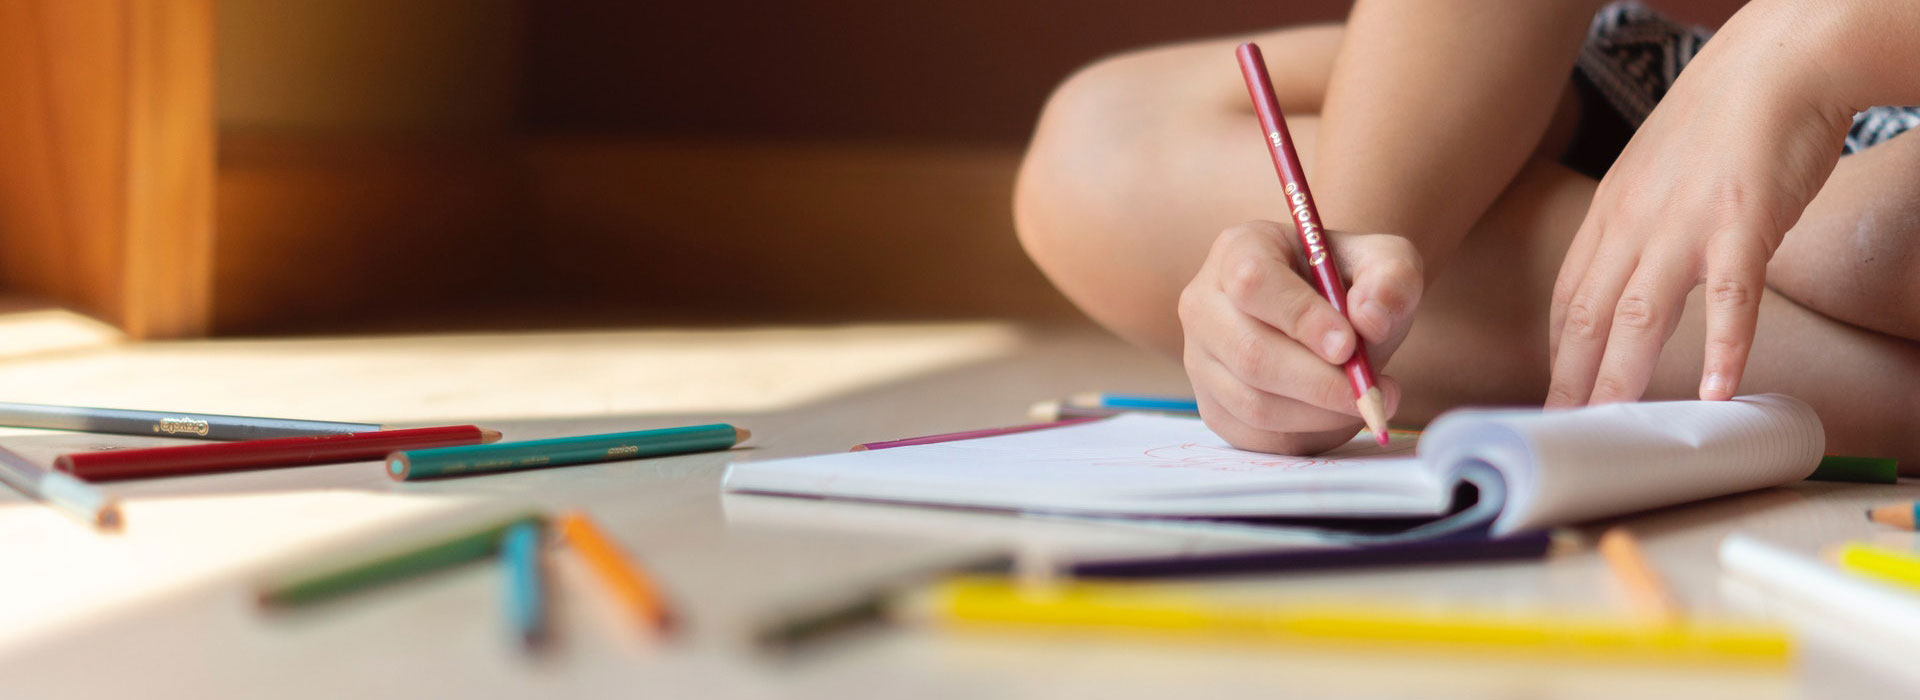 image of a child coloring in a notebook with colored pencils